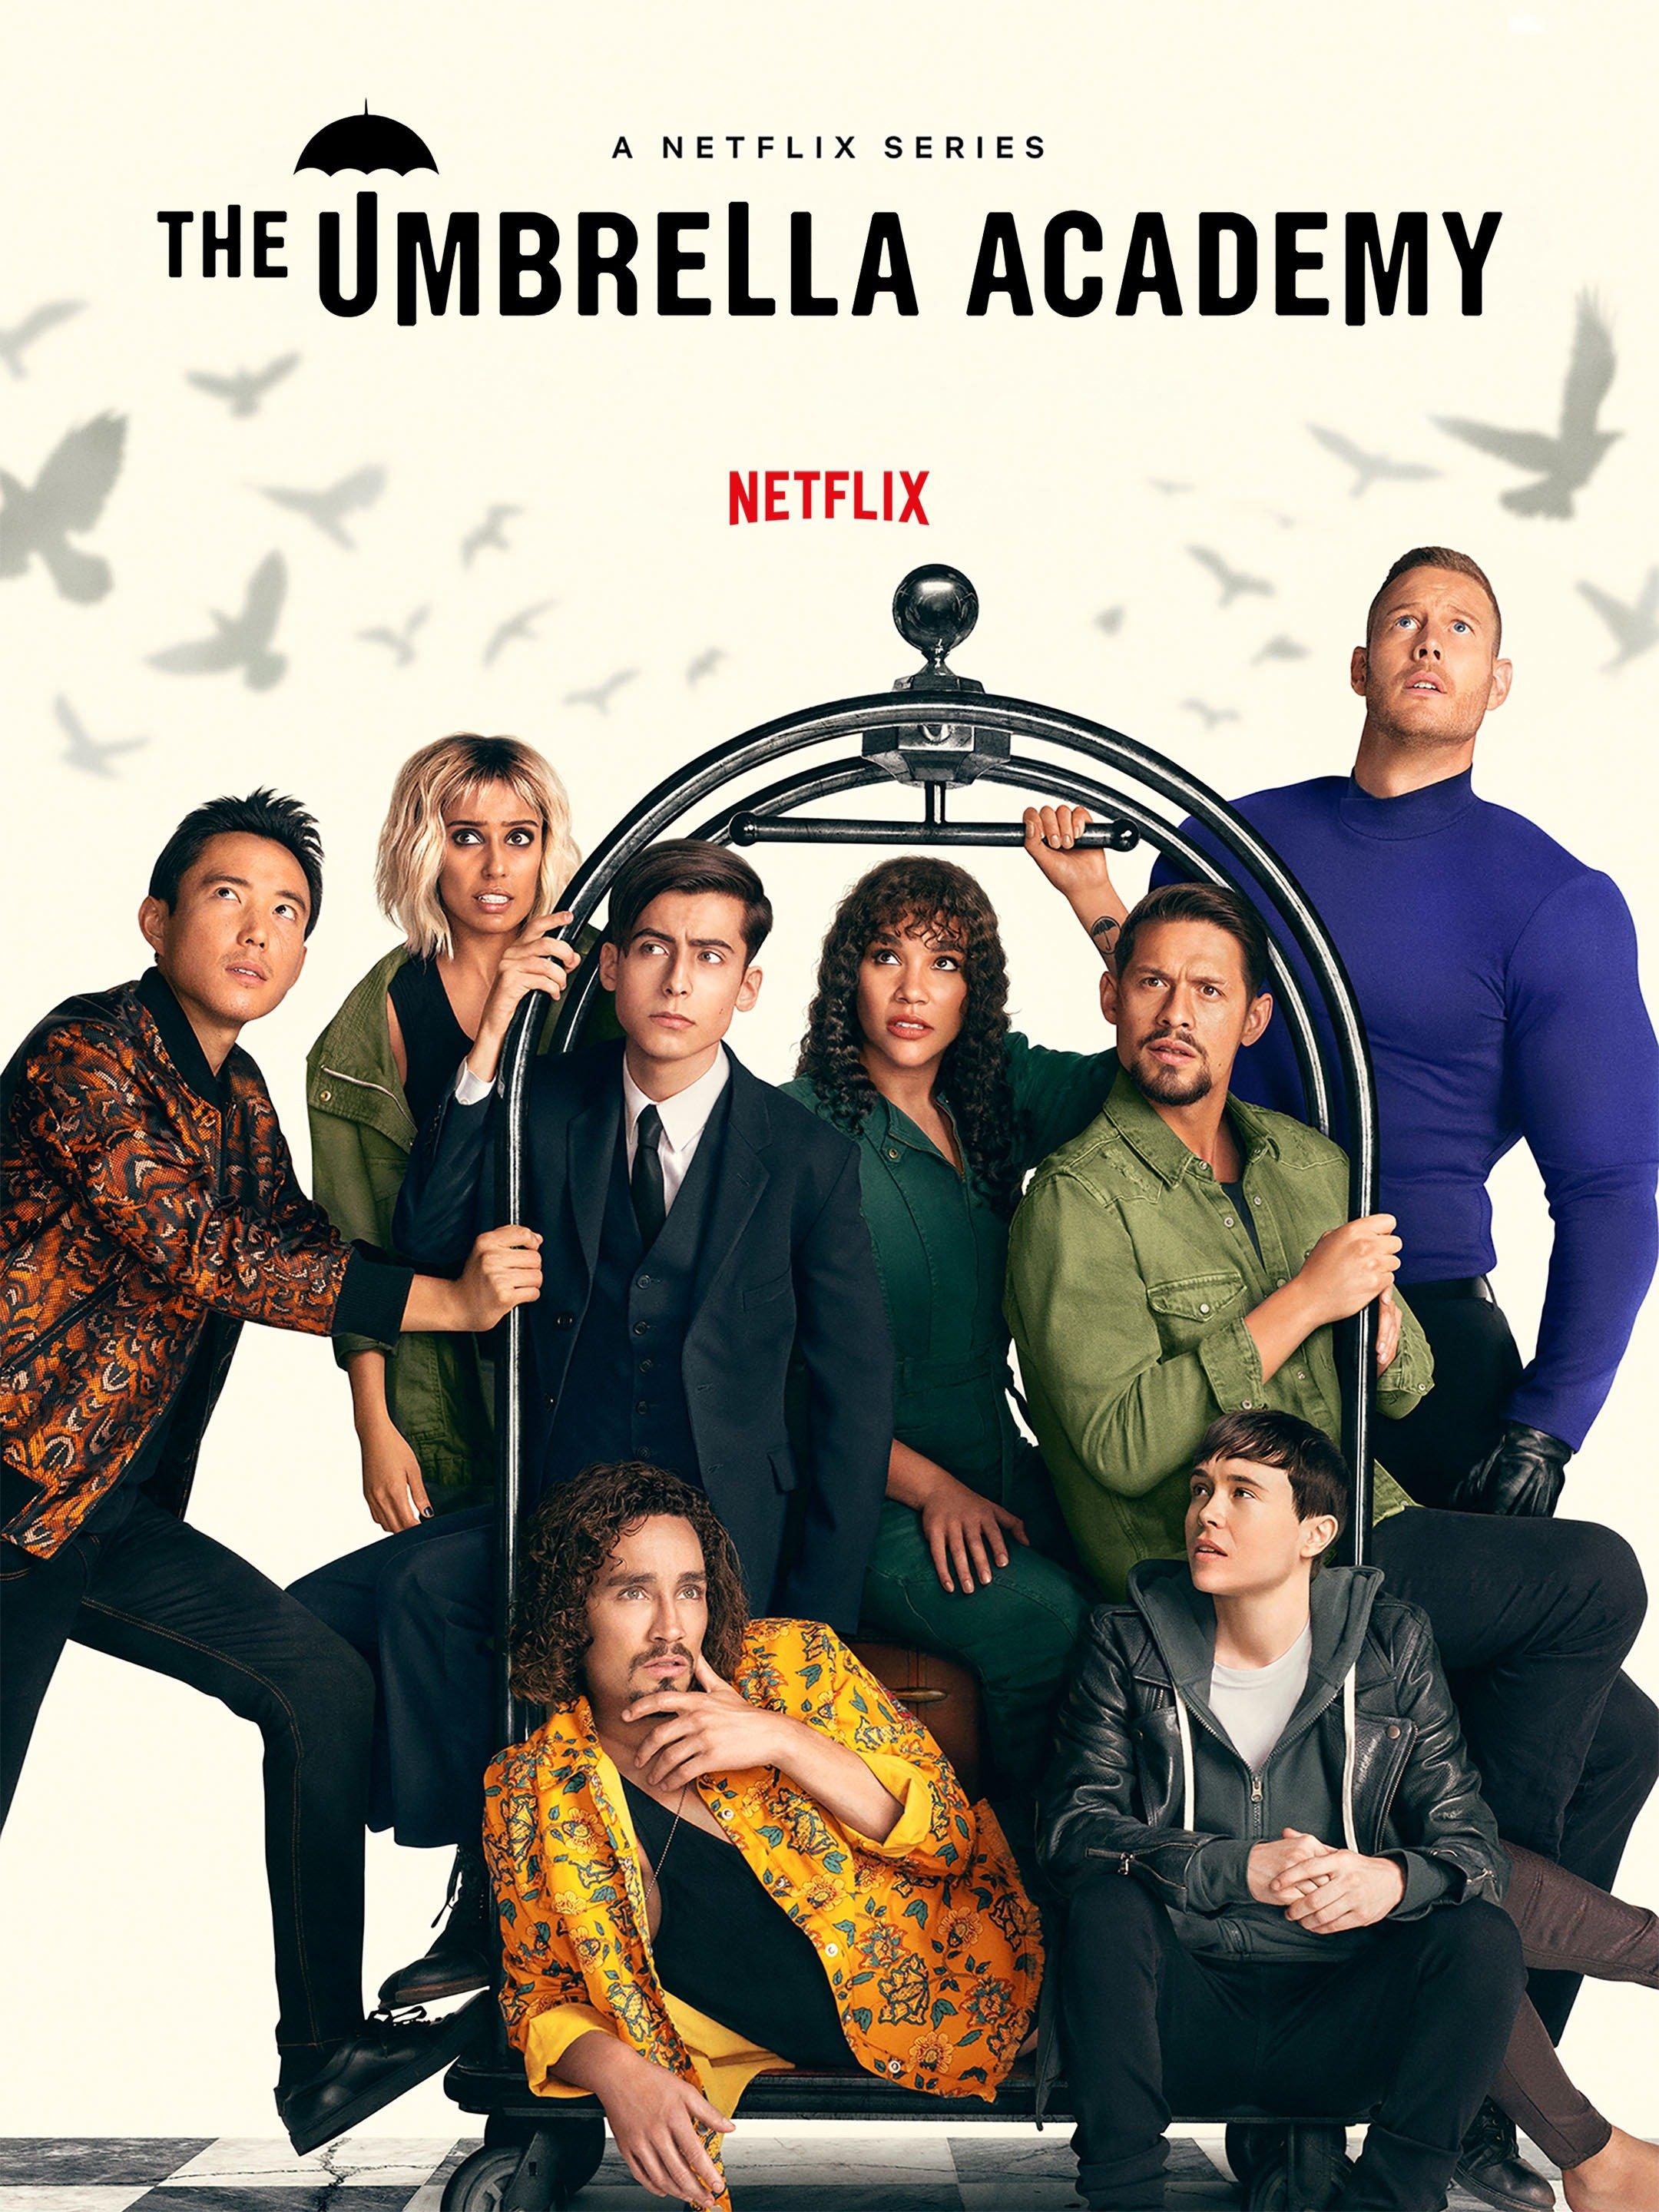 The Umbrella Academy - A Whirlwind of Family Secrets and Superpowers! 'The Umbrella Academy' Excites with Its Intriguing Mystery. 